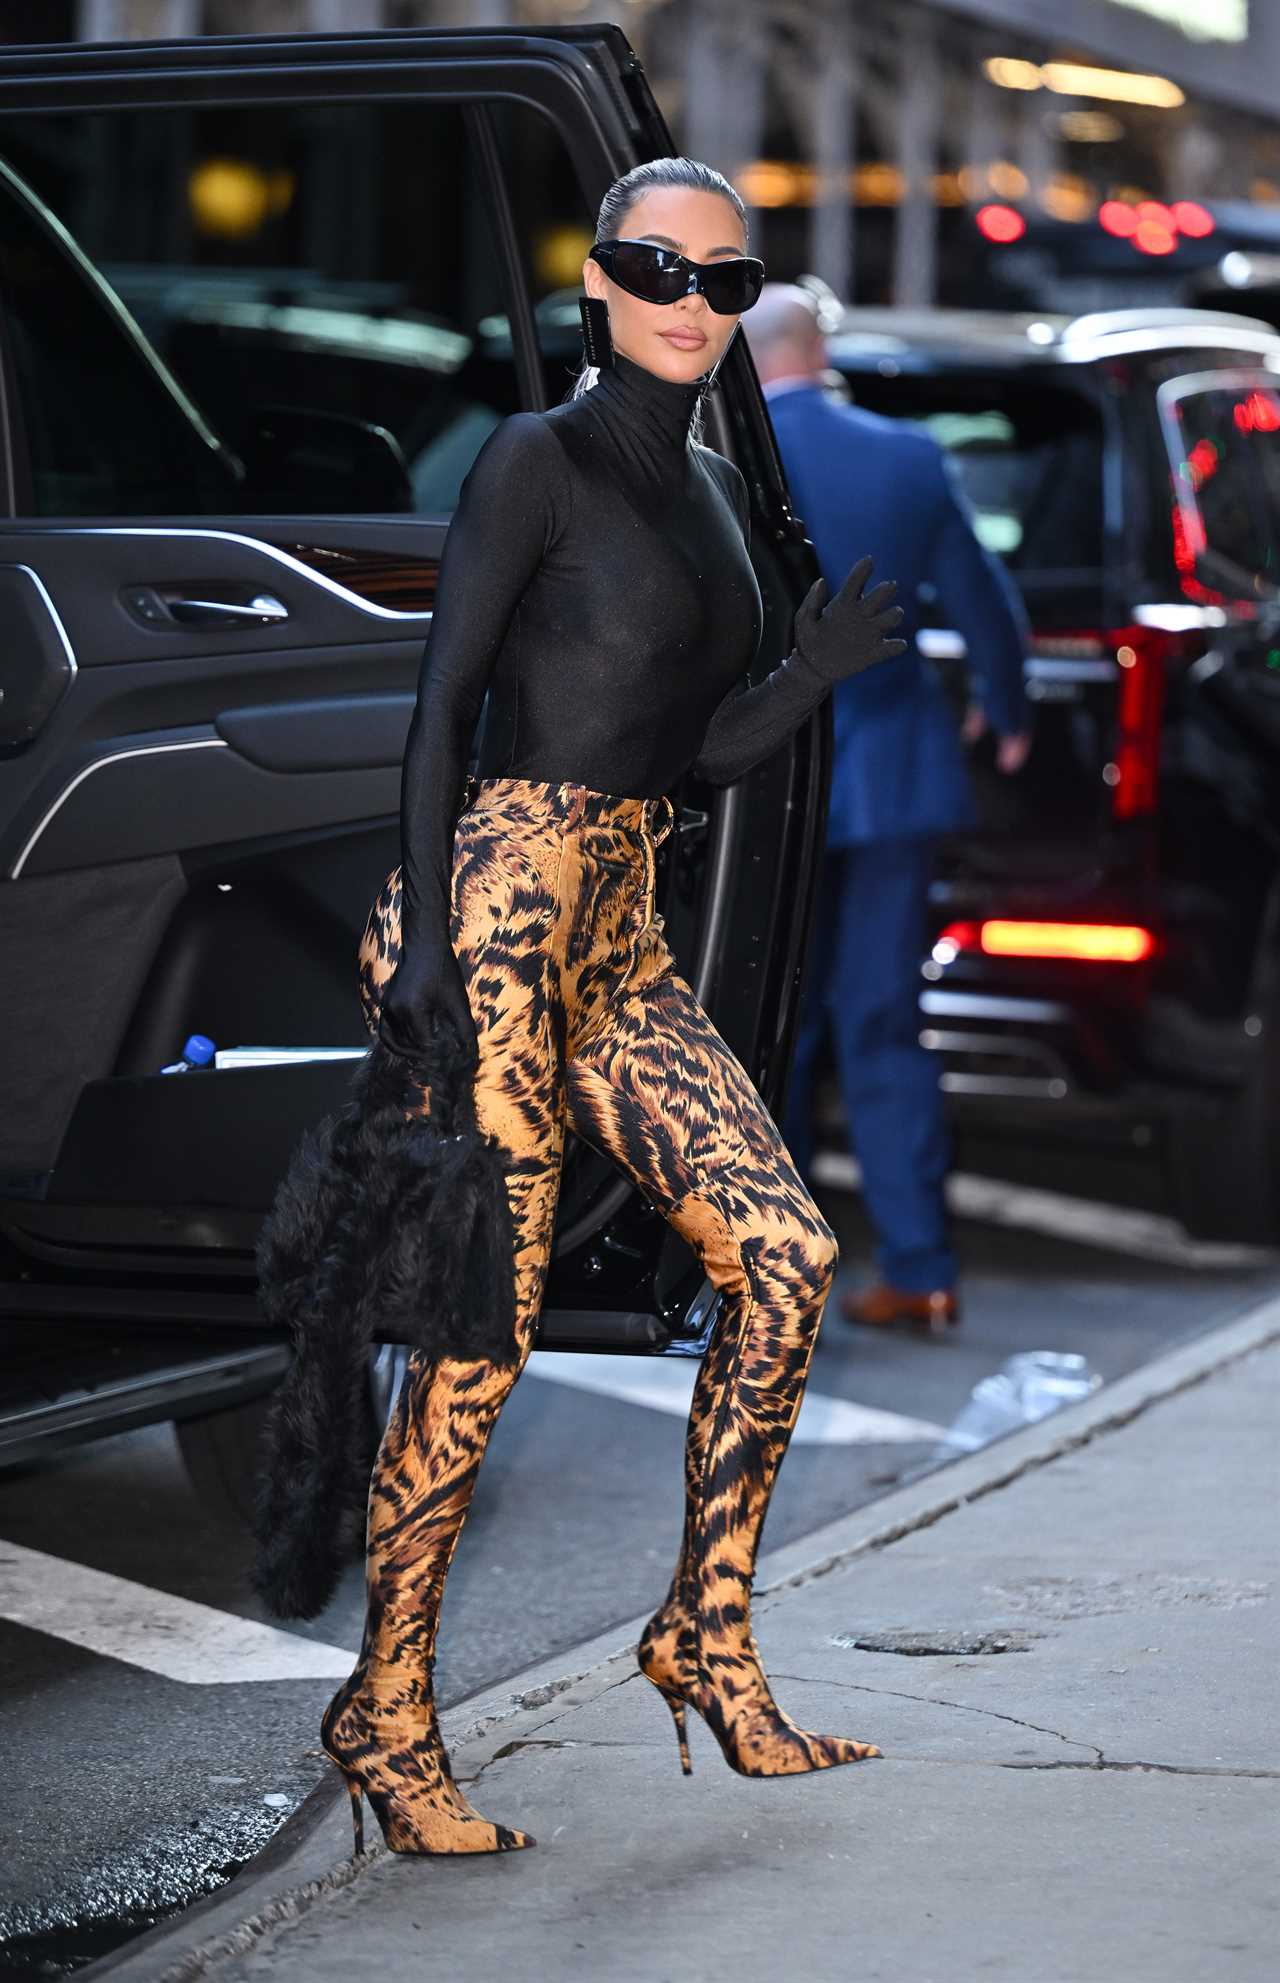 Kim Kardashian shows off her tiny waist and dramatic hair makeover as she struts in Dolce & Gabbana catsuit in Milan